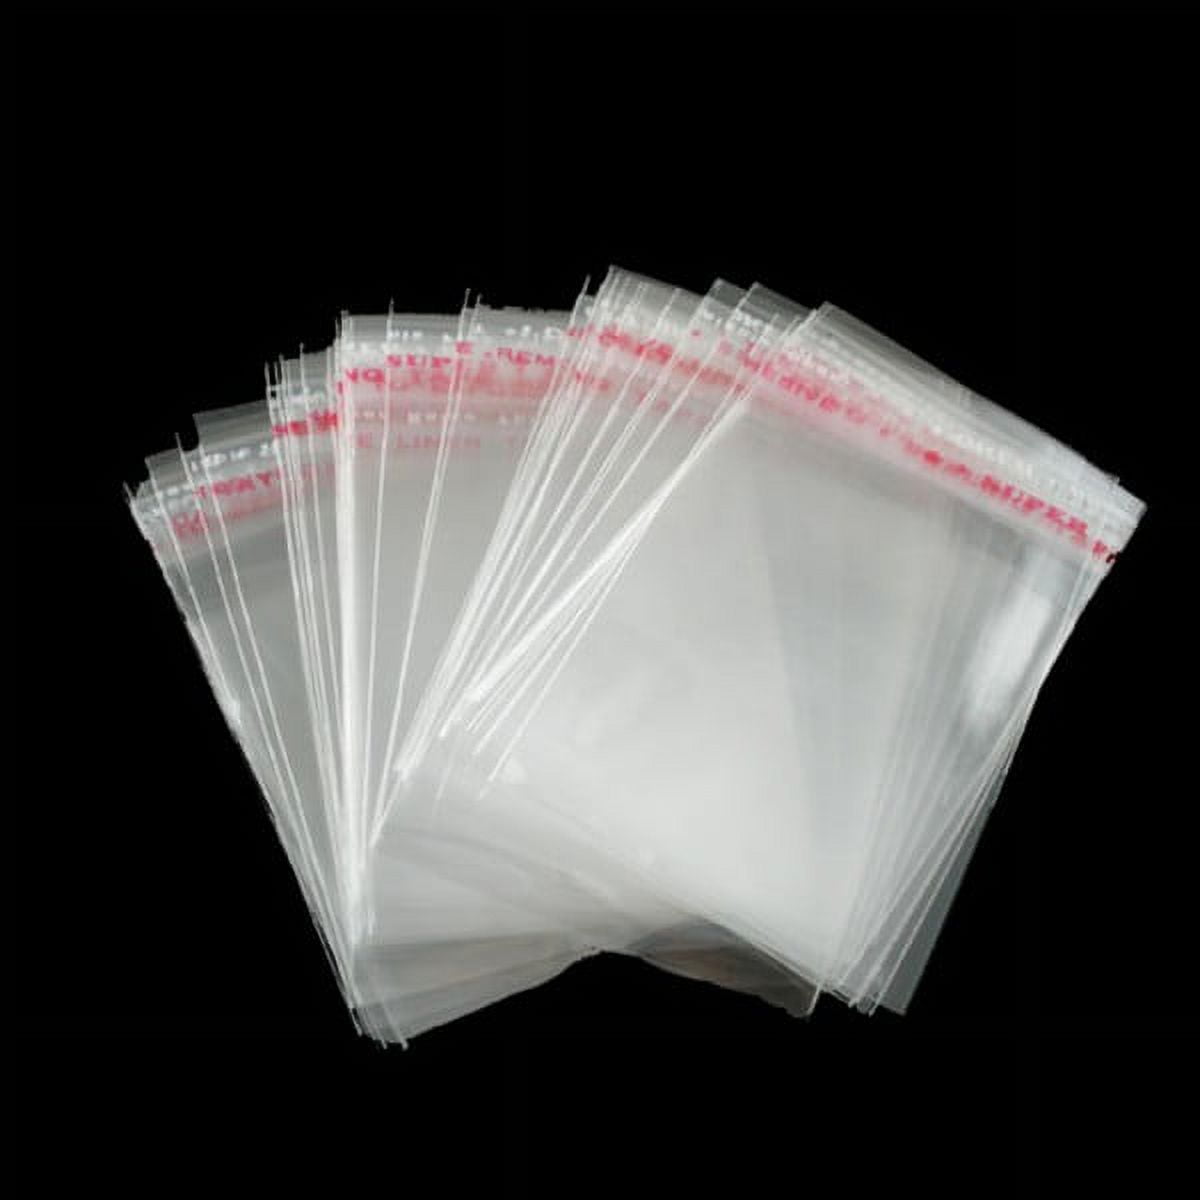 200 Pcs Clear Resealable Polypropylene Bags Self Seal Magazine Protectors  for Collectors Clear Plastic Bags for Magazine Prints Photos Documents (9 x